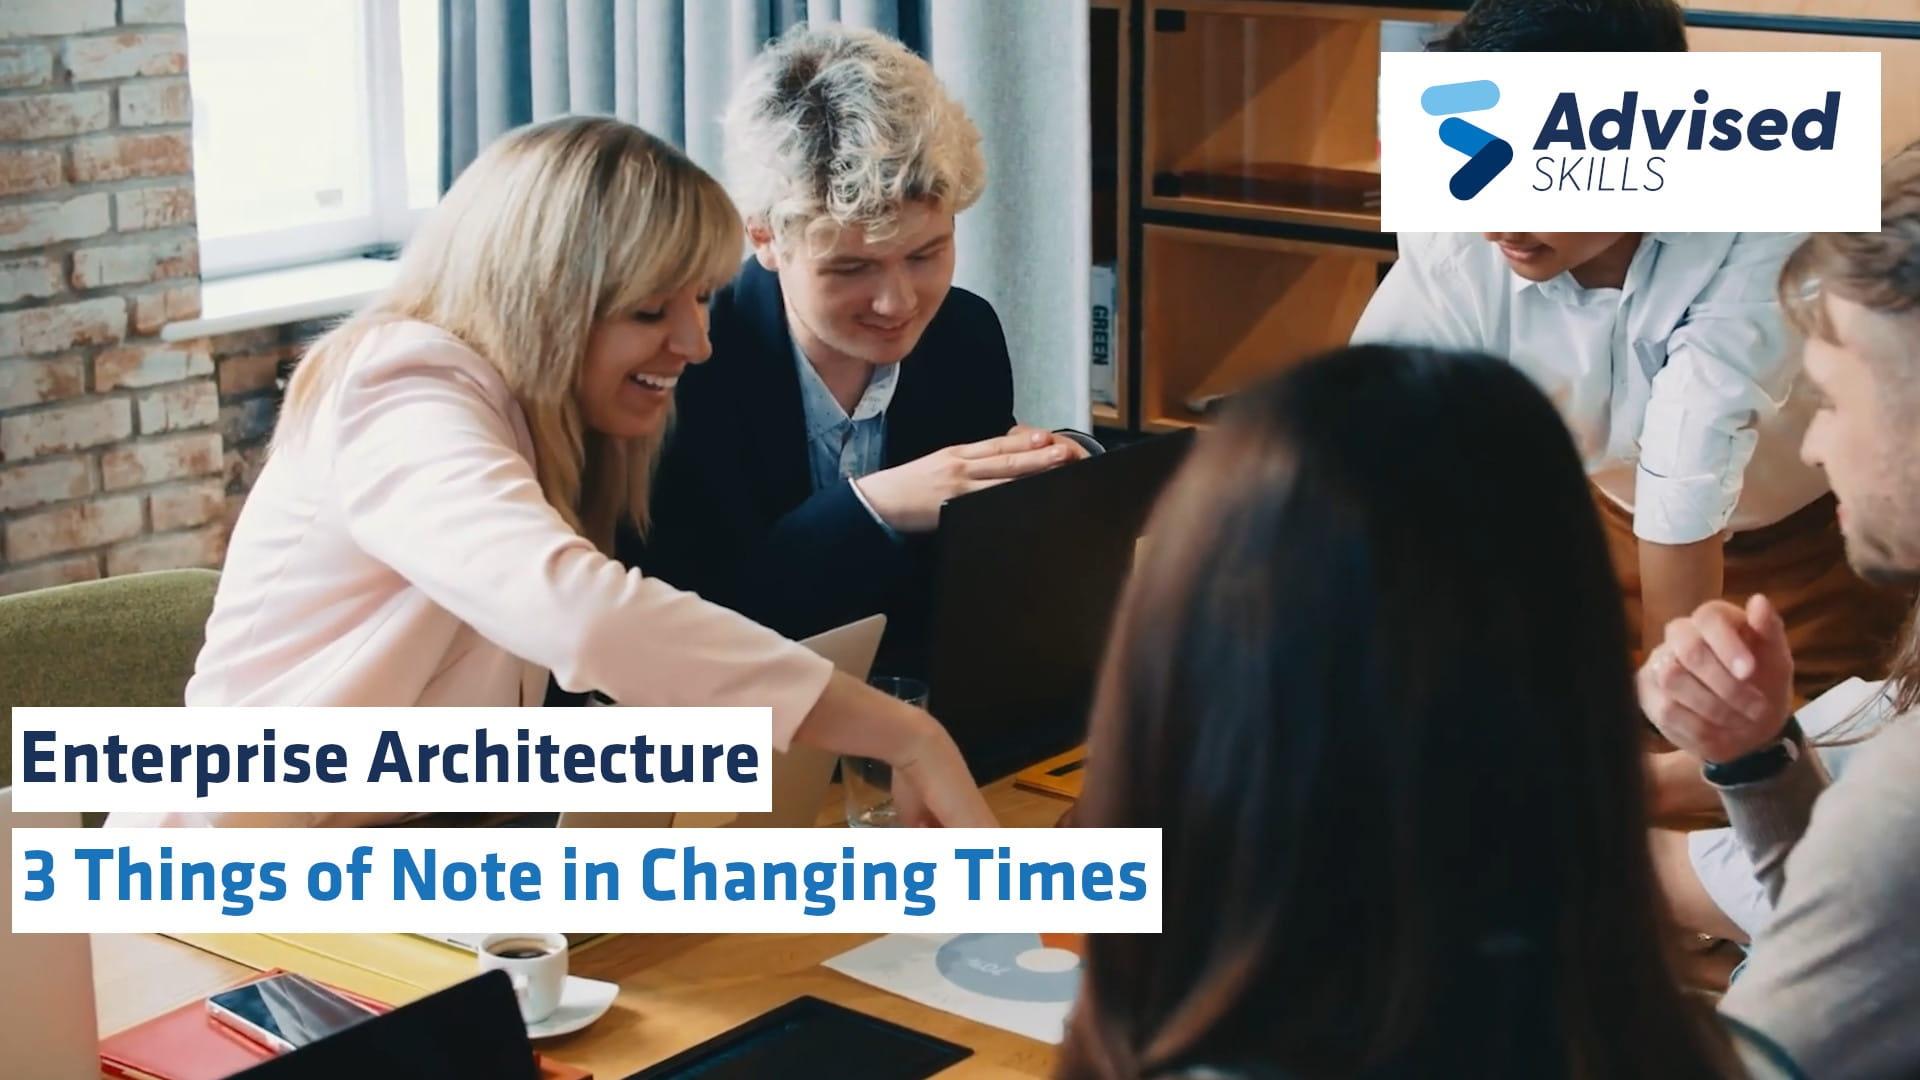 Enterprise Architecture: 3 Things of Note in Changing Times